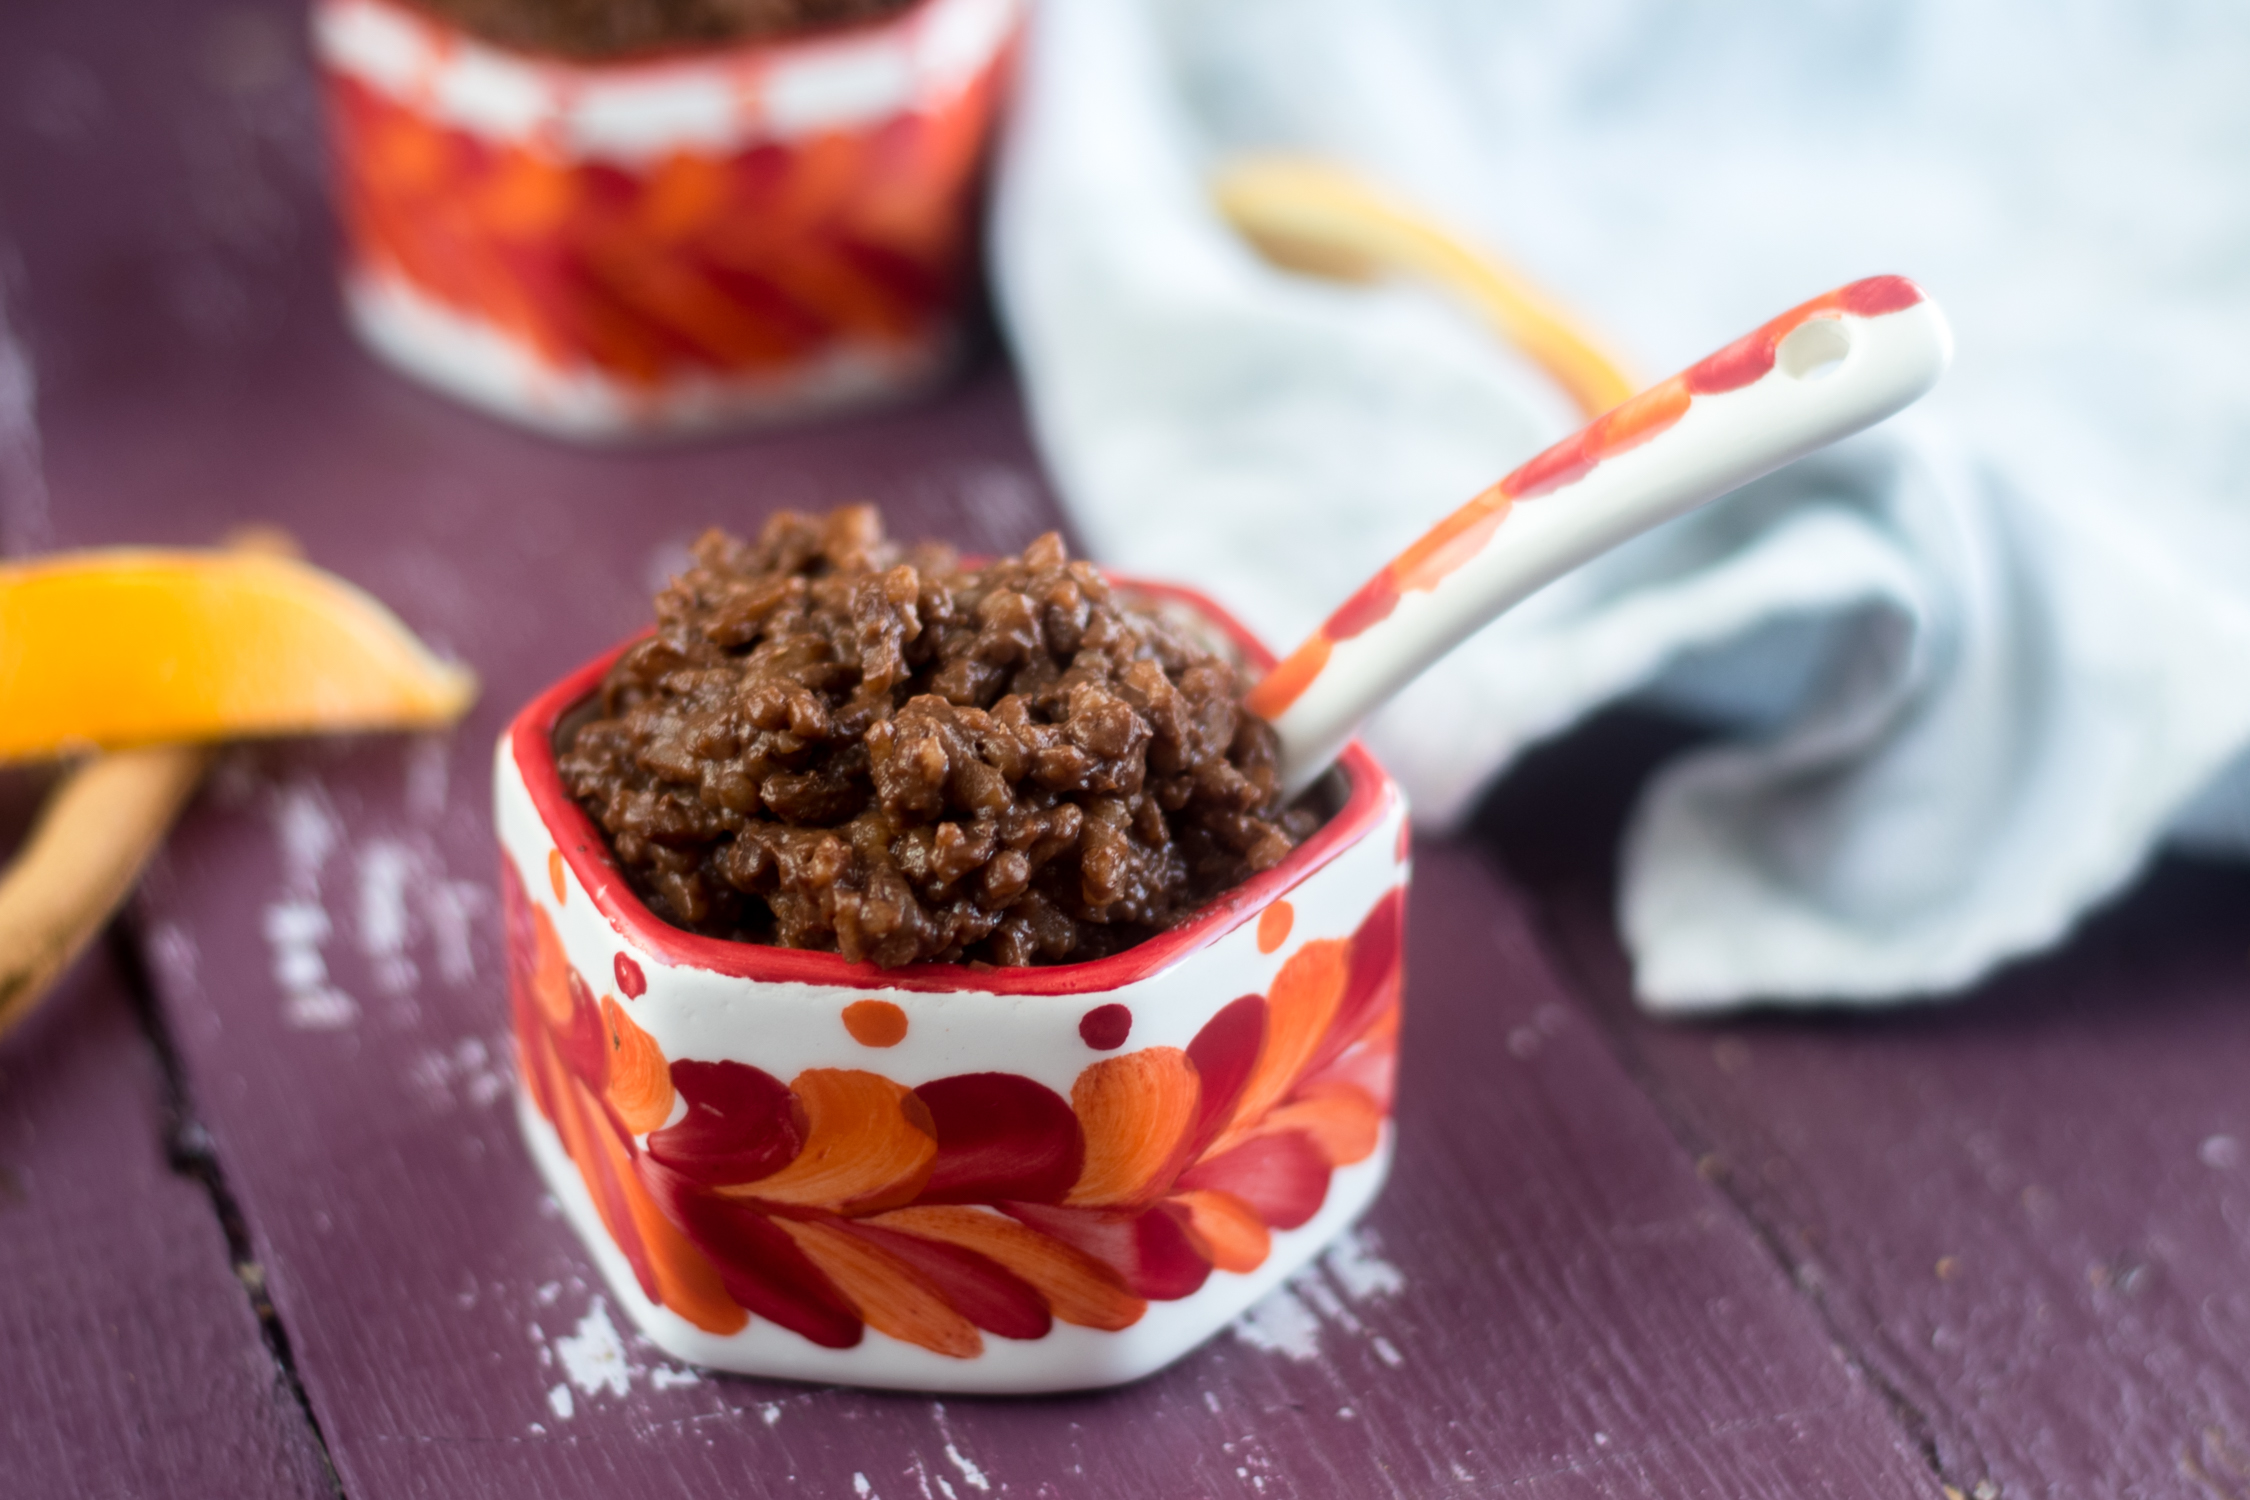 A chocolatey twist on traditional arroz con leche. This creamy rice pudding is infused with two types of chocolate. This is great for dessert or a sweet breakfast treat.